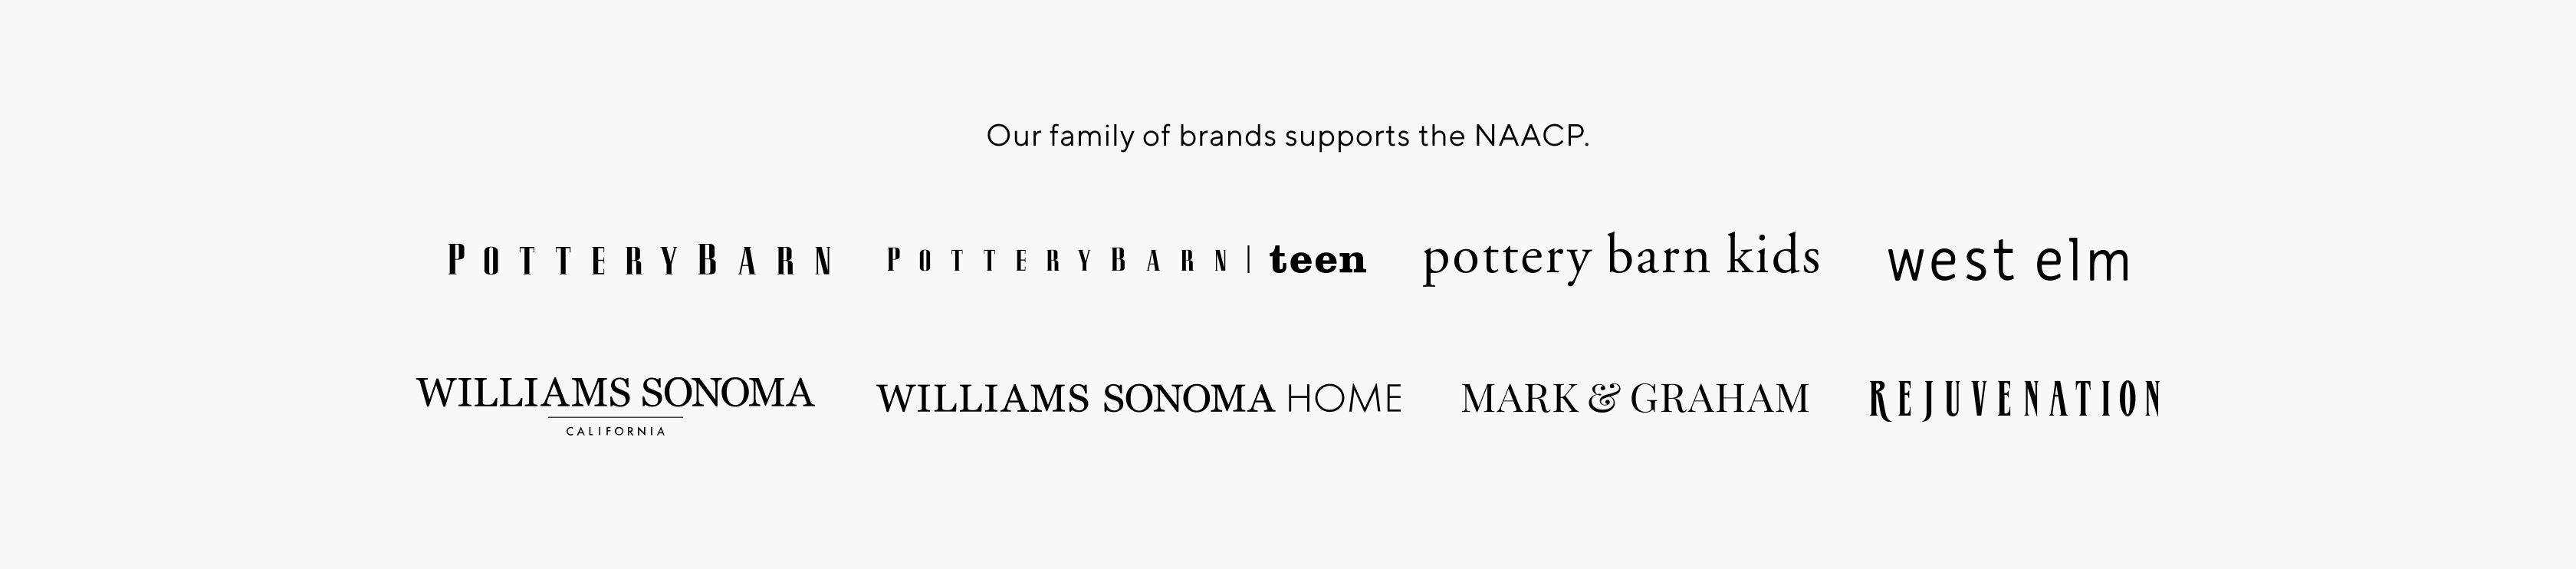 Our Family of Brands Supports the NAACP